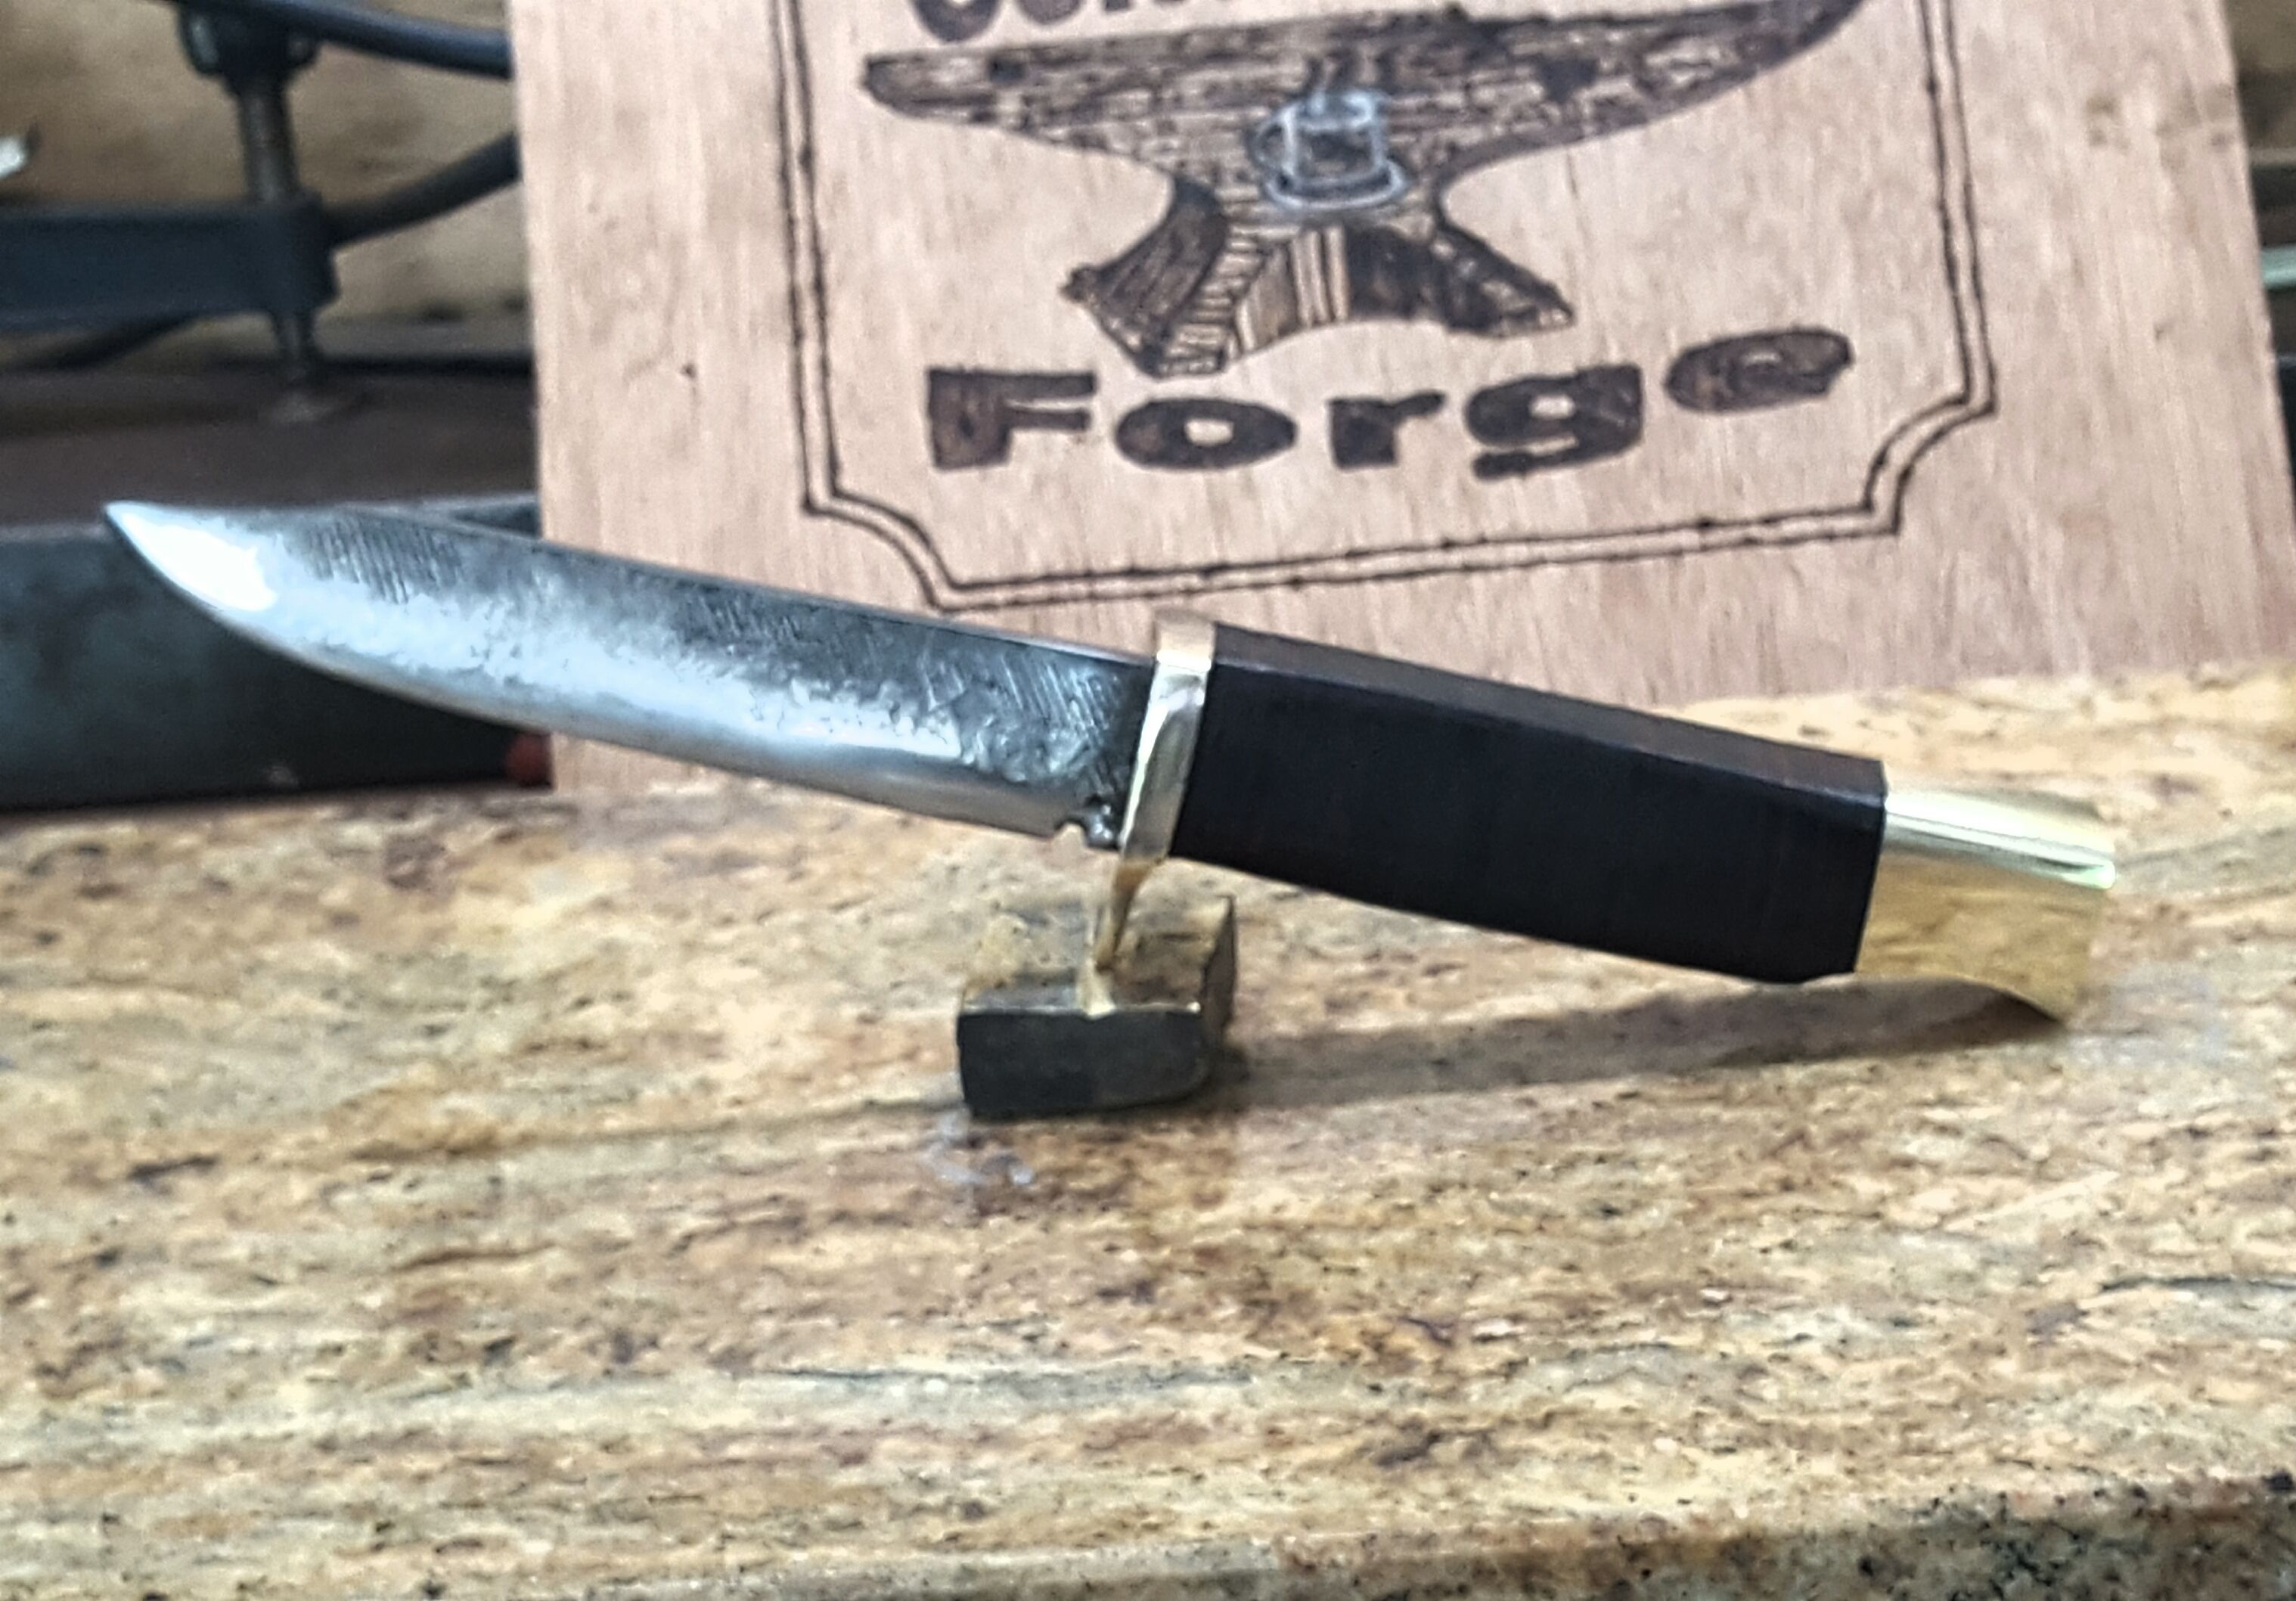 Buy Custom Forged Drop Point Knife, Brass Bolsters And Guards